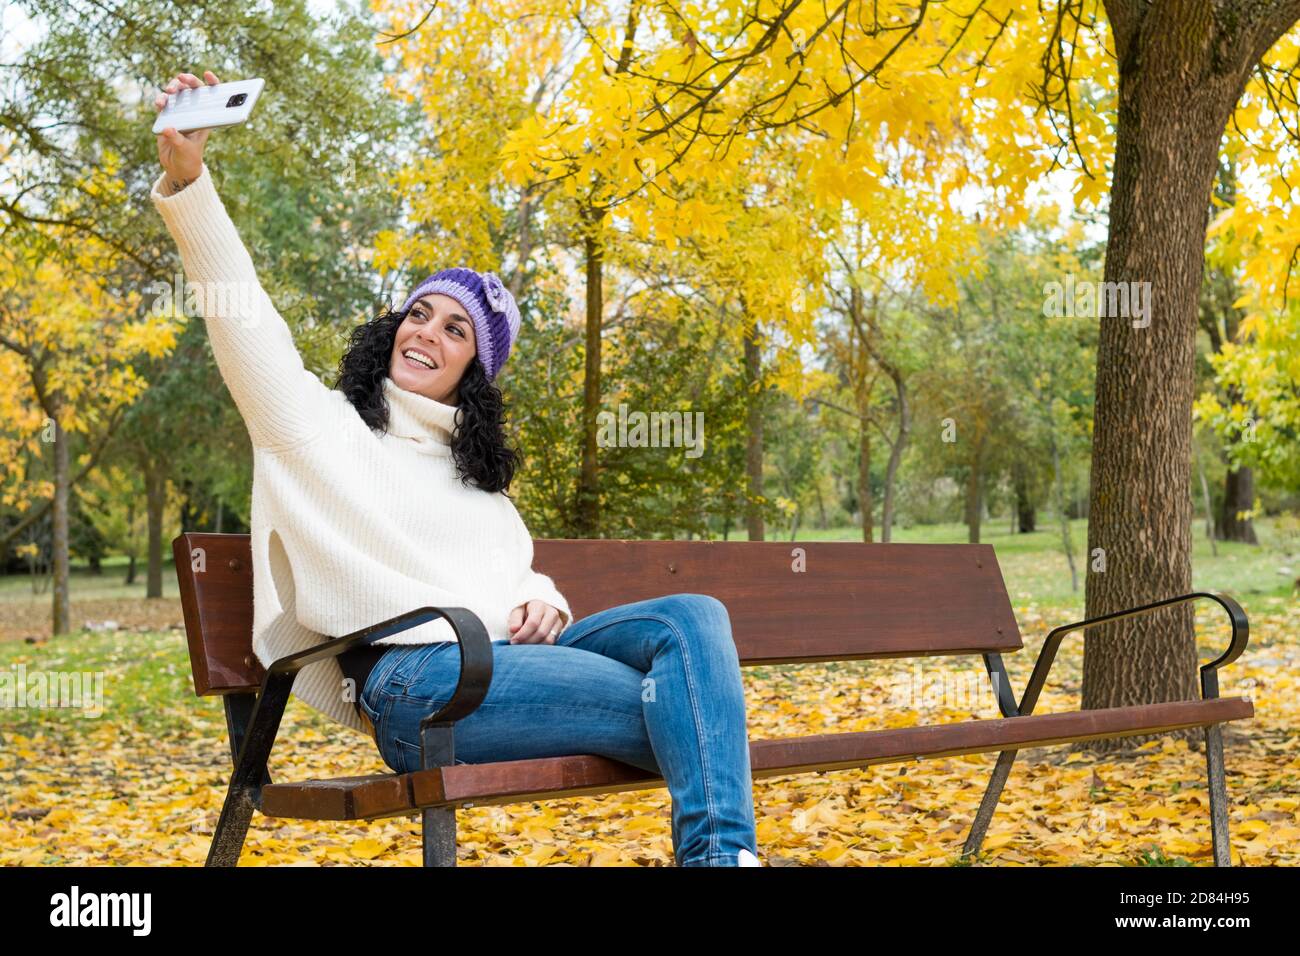 young woman with curly black hair and warm in sweater and wool hat taking a self portrait with her mobile while smiling sitting on a wooden bench in a Stock Photo